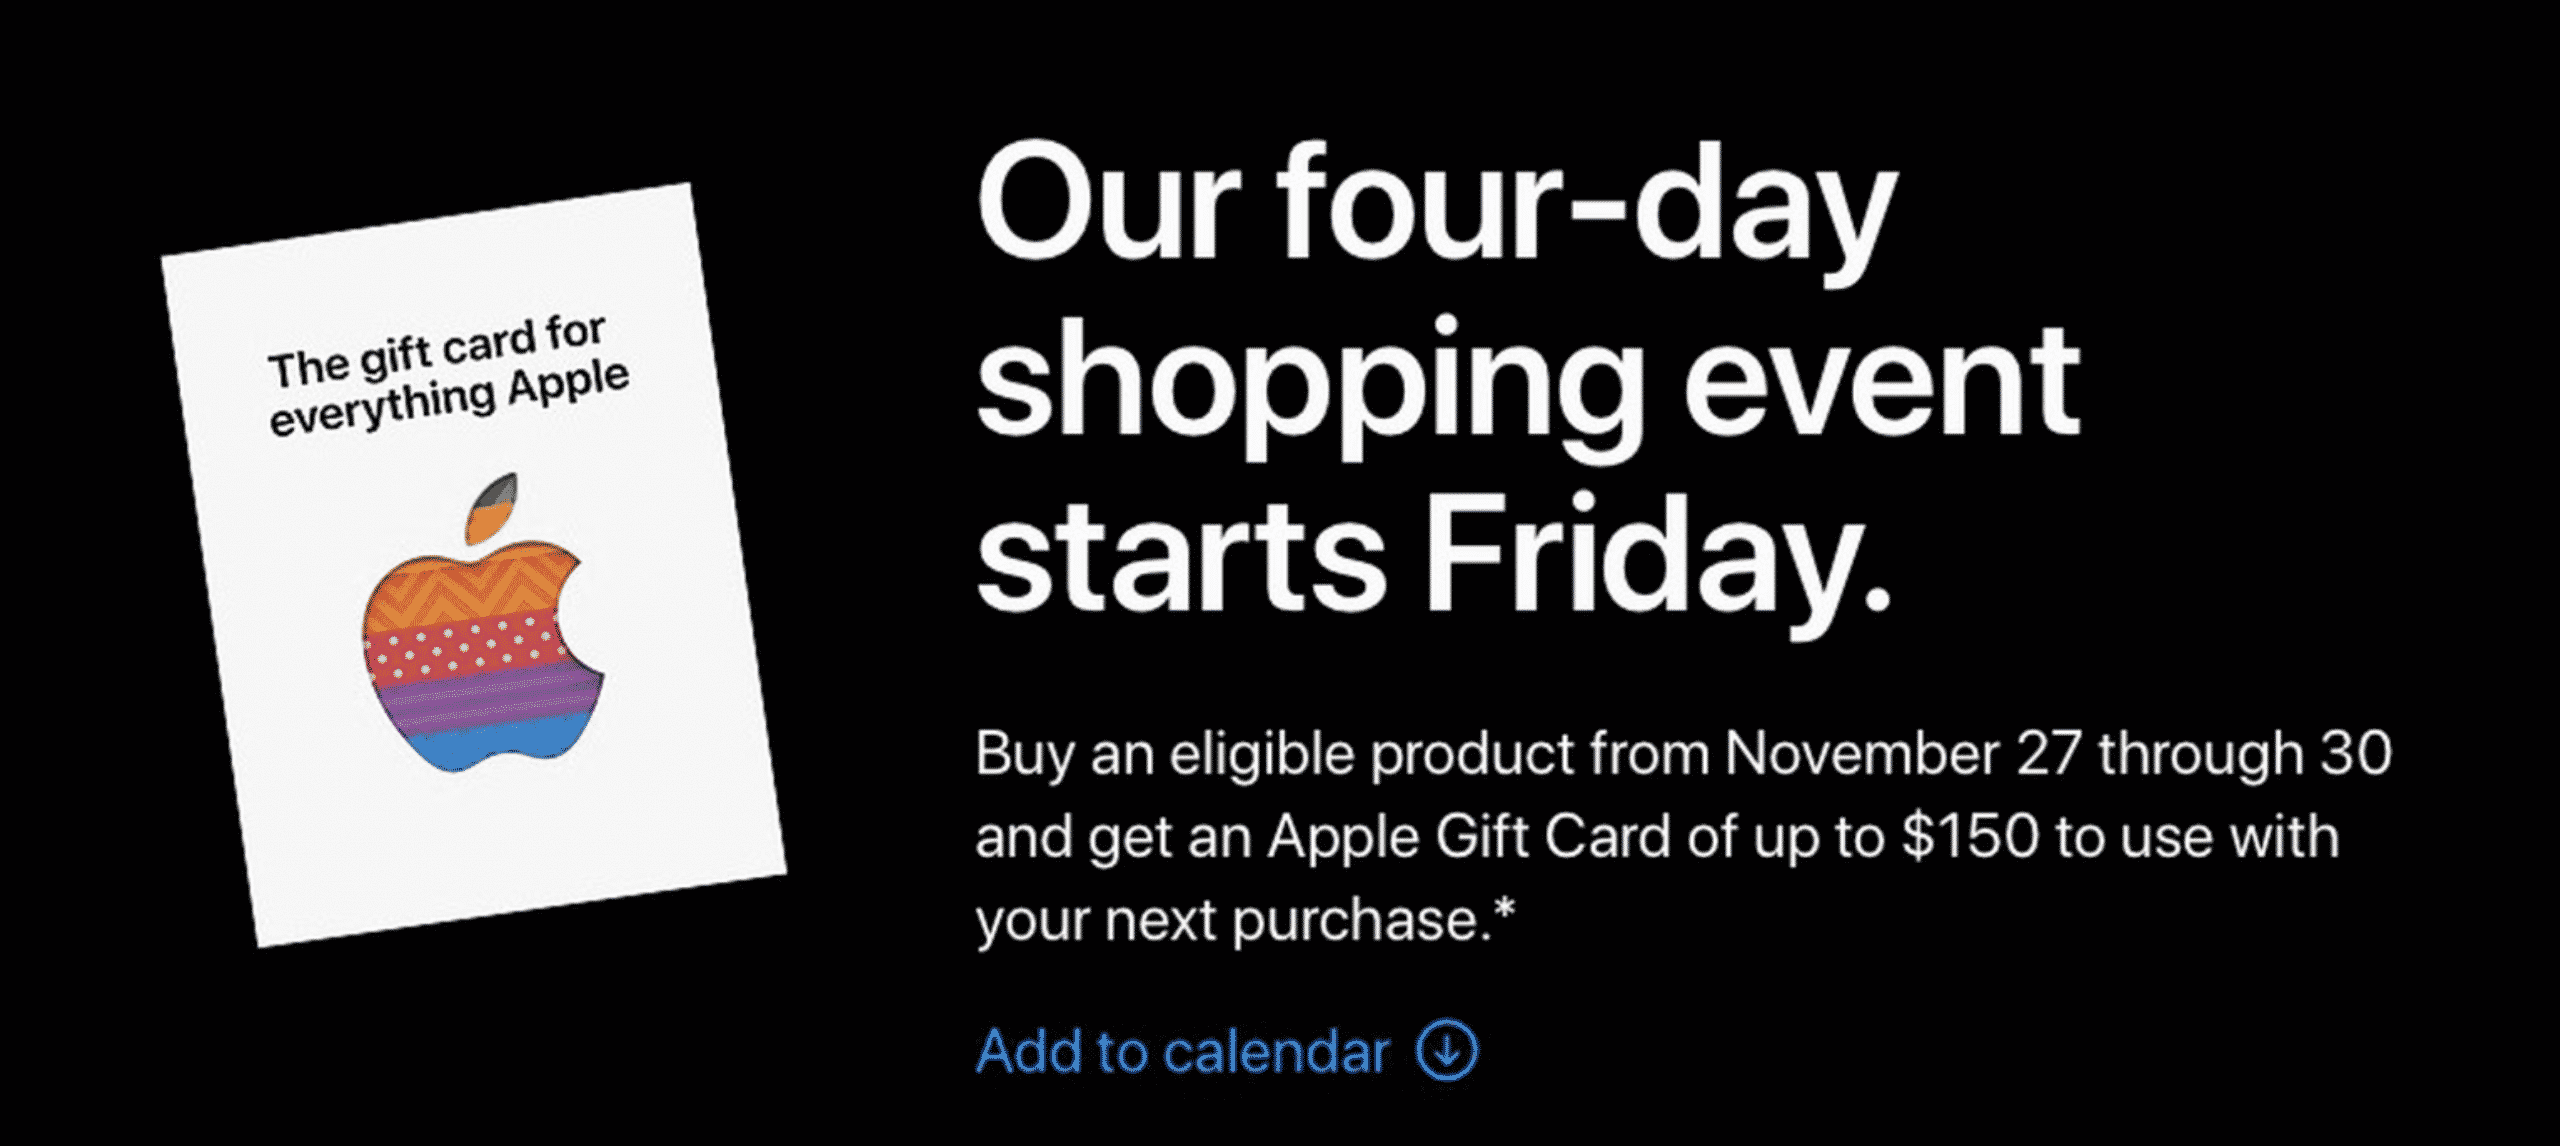 Apple 4-Day Gift Card